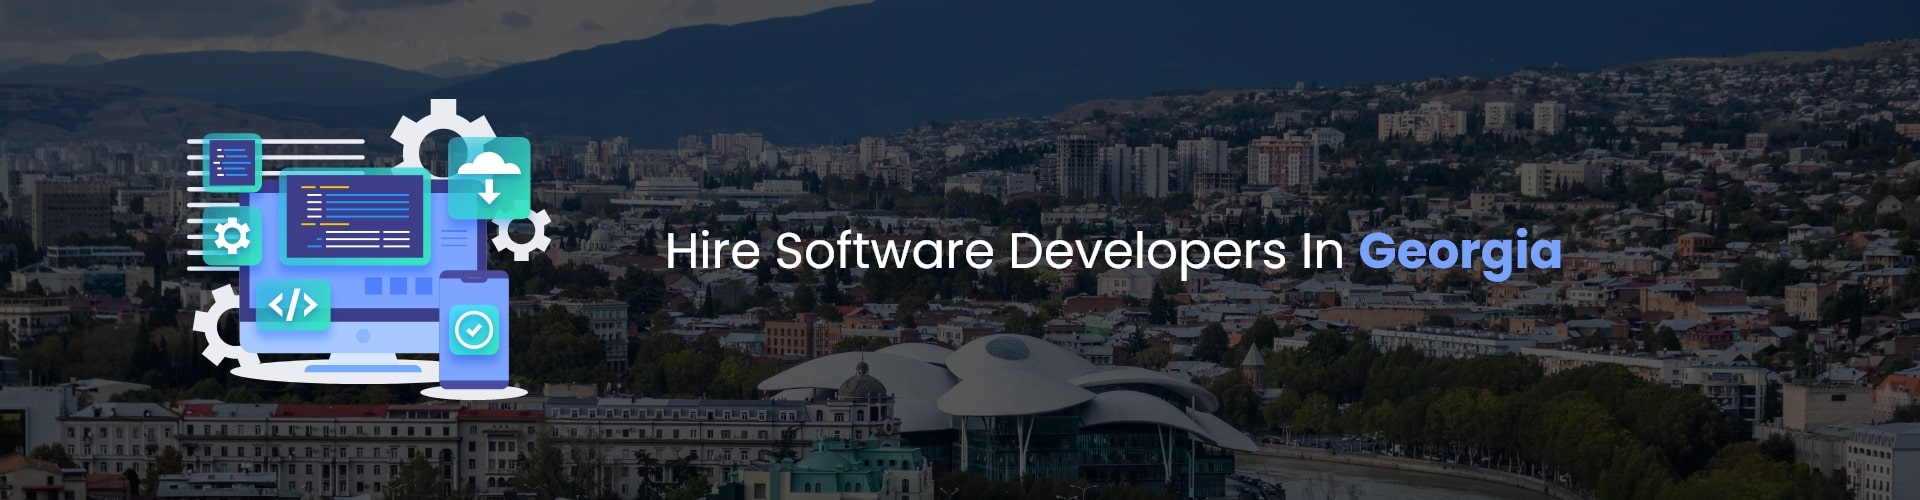 hire software developers in georgia